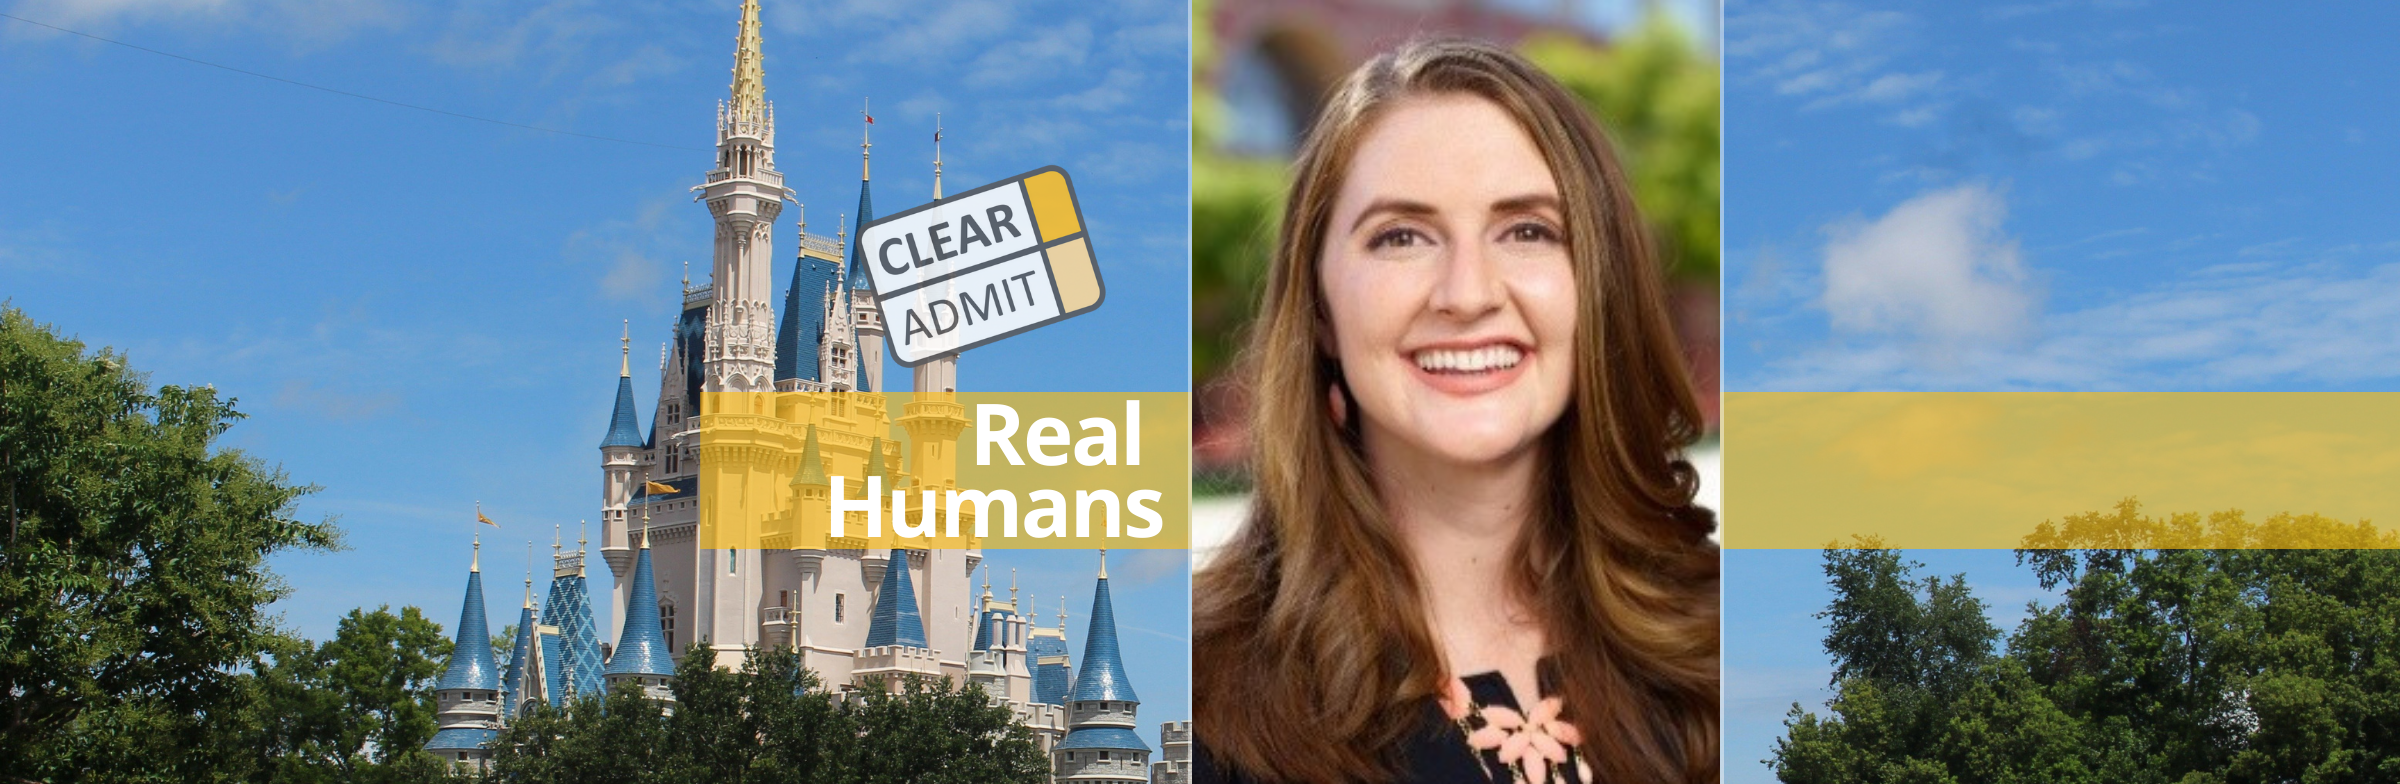 Image for Real Humans of Disneyland Resort: Casey Brown, USC Marshall MBA ’19, Marketing Strategy Manager